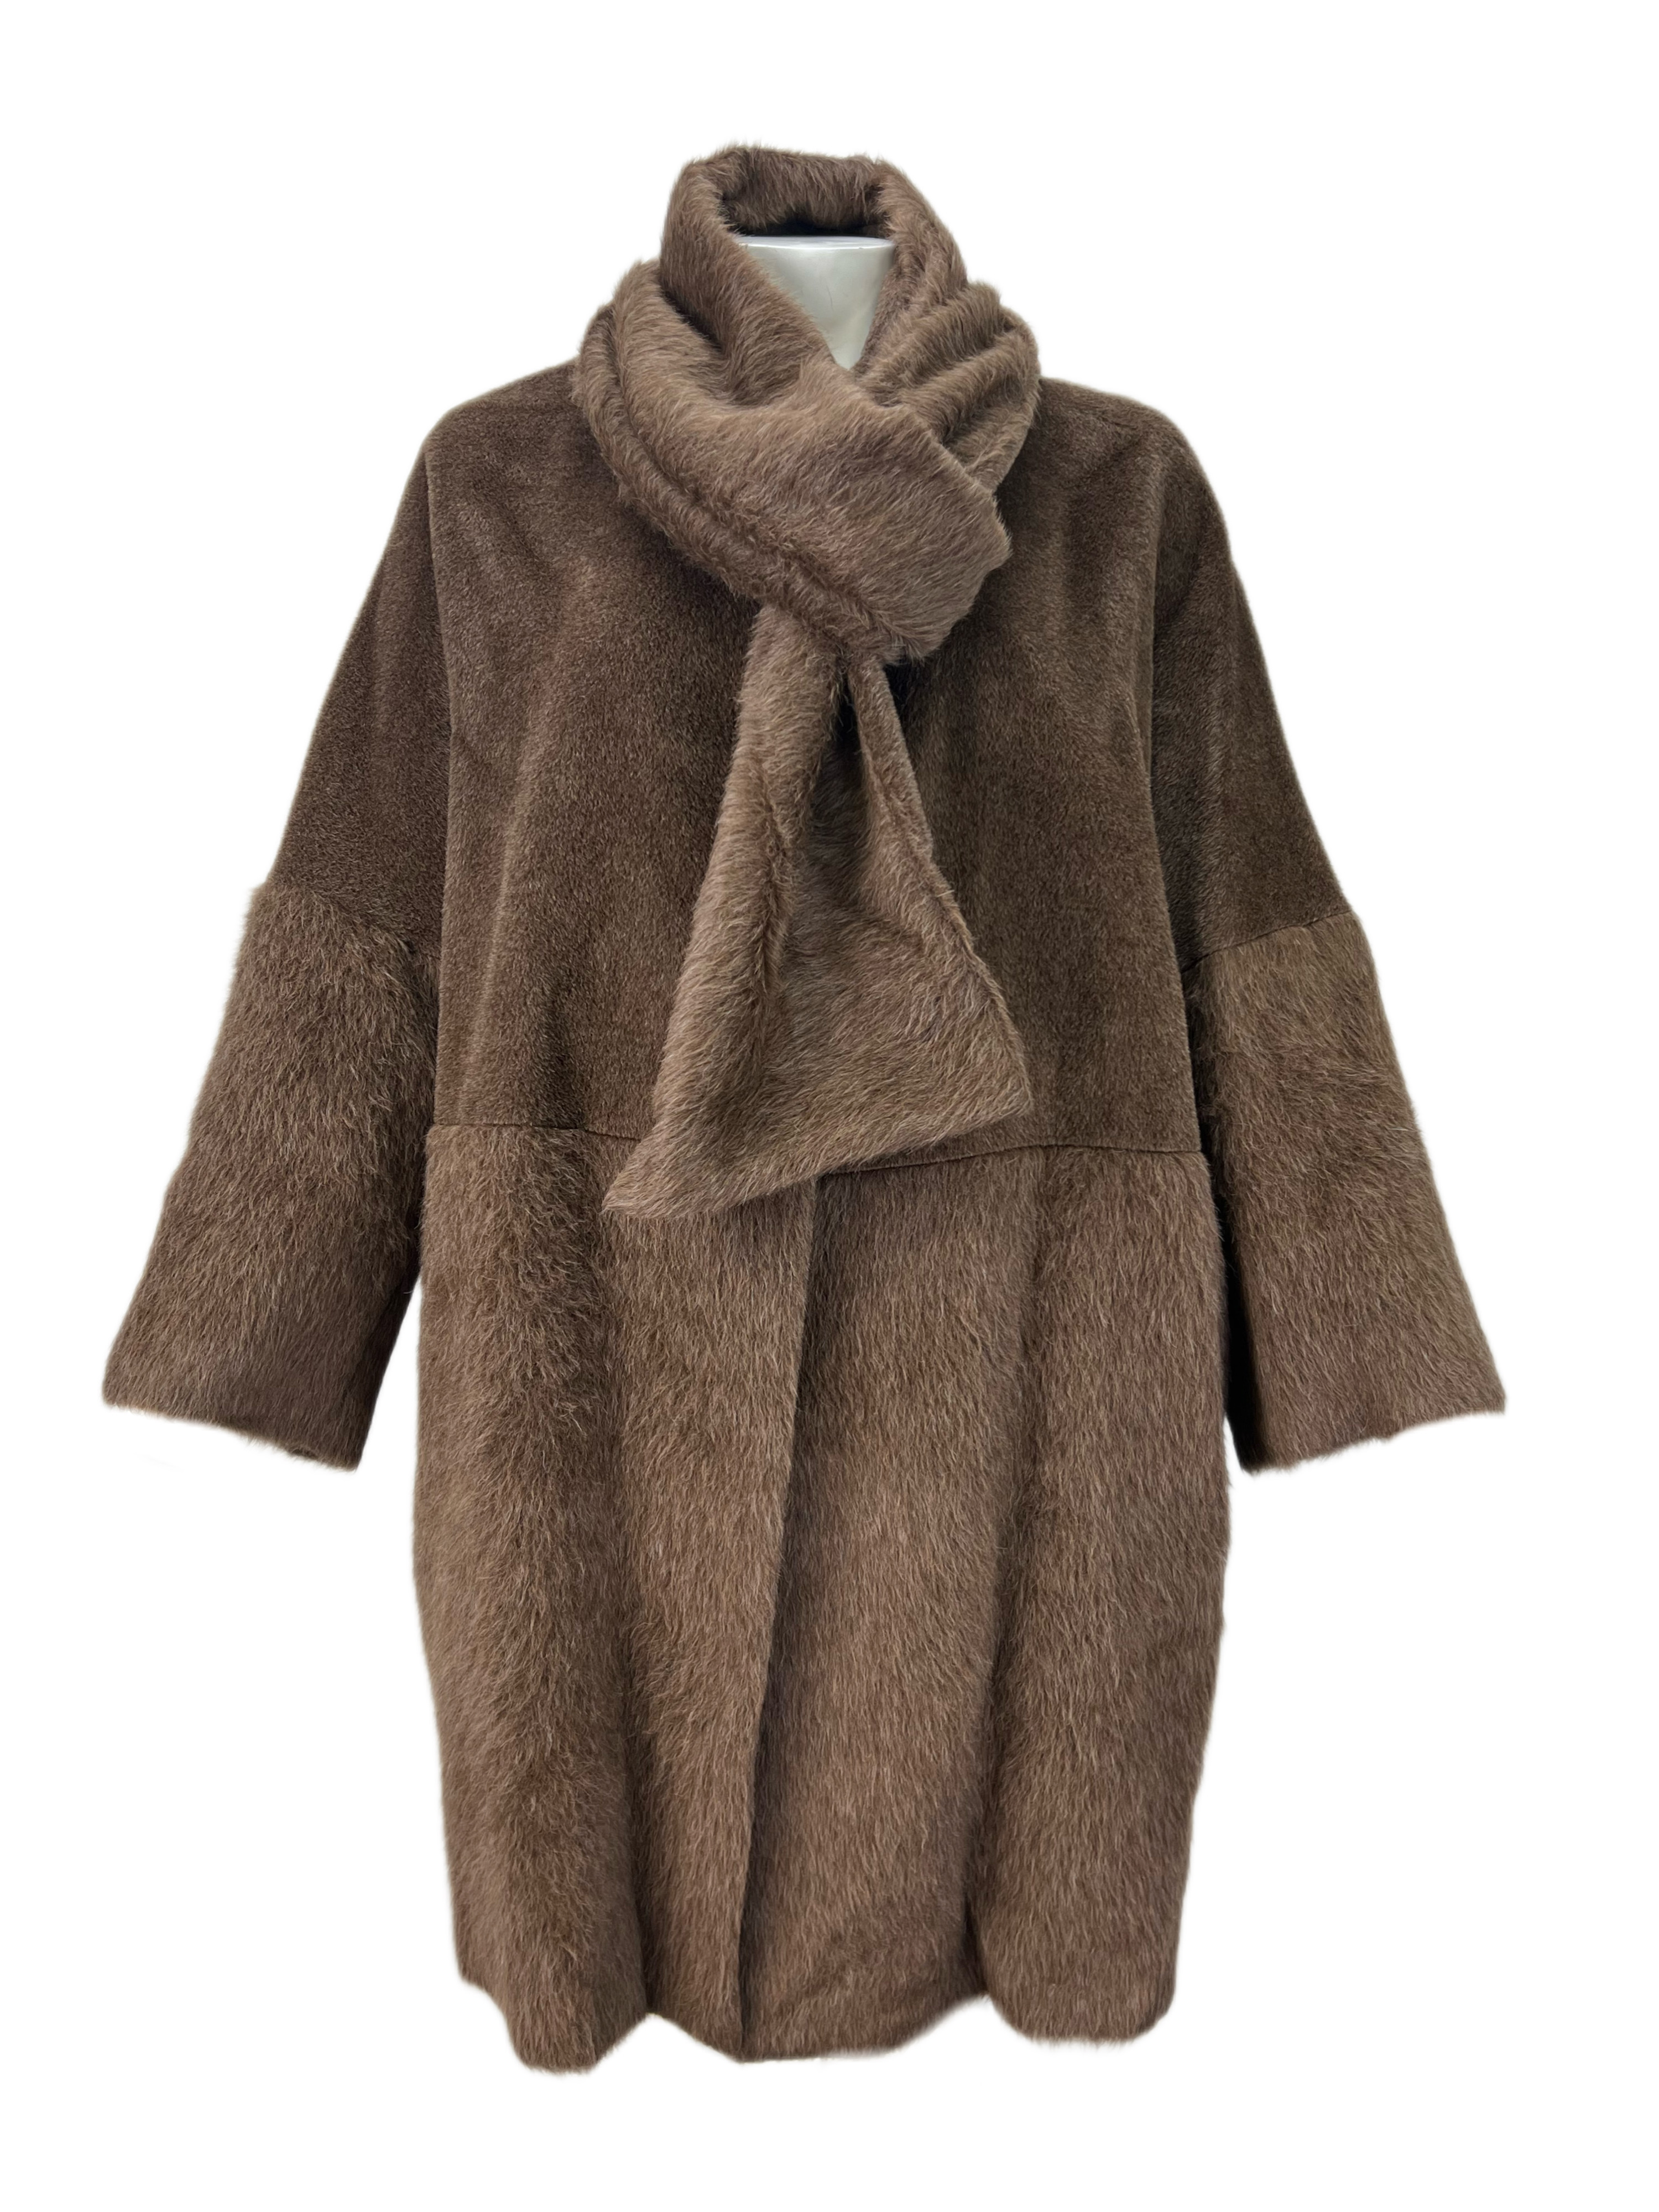 Pre-owned Marina Rinaldi Women's Brown Torre Insulated Scarf Coat